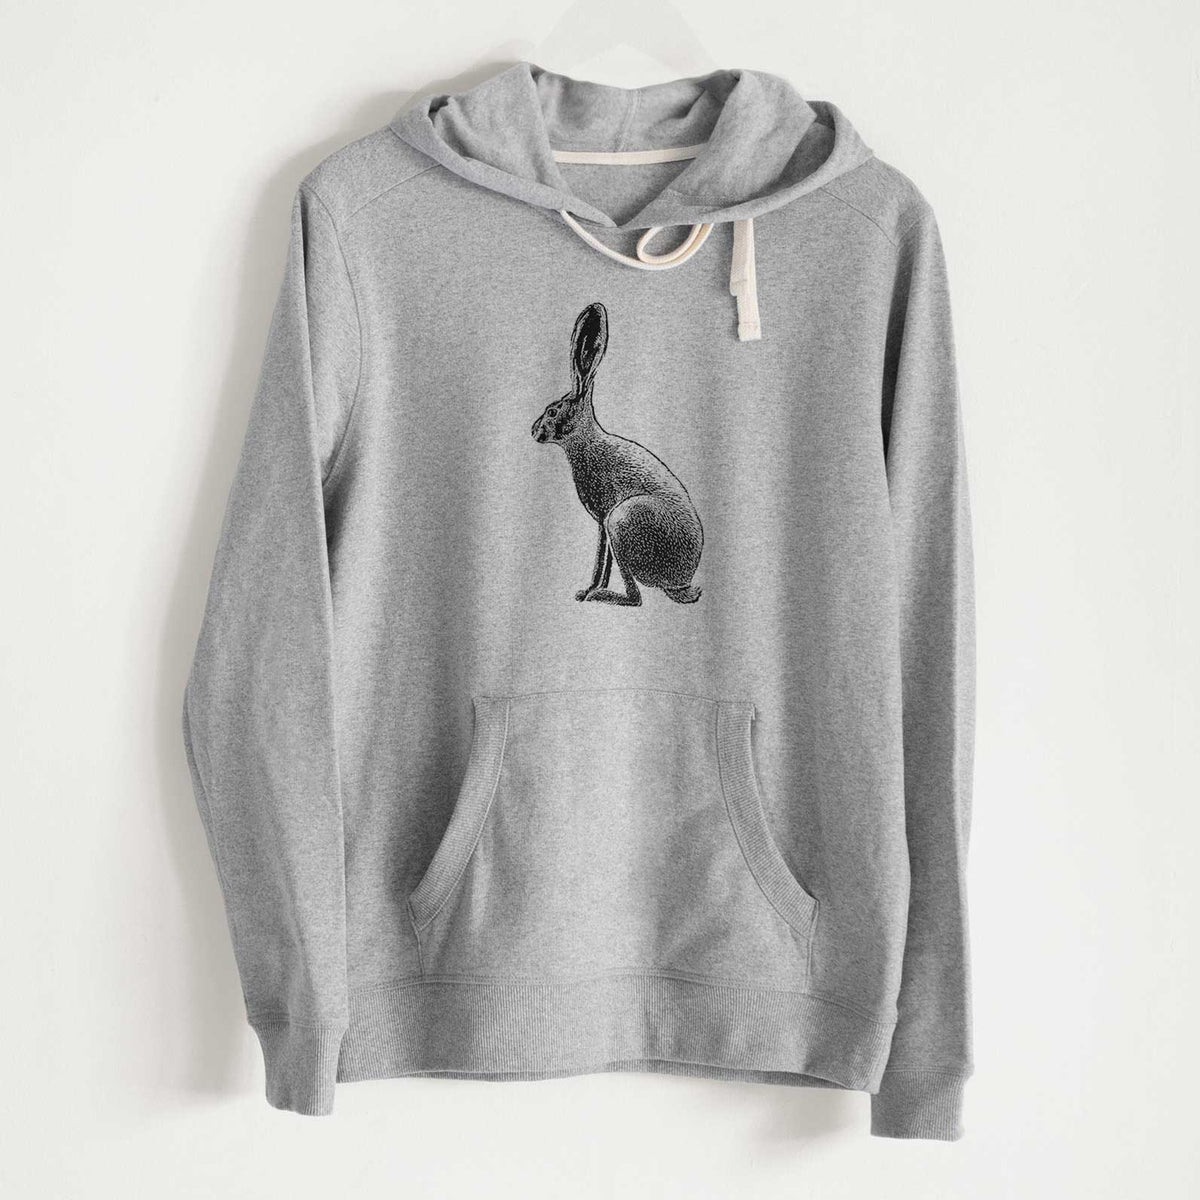 Wild California Hare - Black-tailed Jackrabbit - Unisex Recycled Hoodie - CLOSEOUT - FINAL SALE